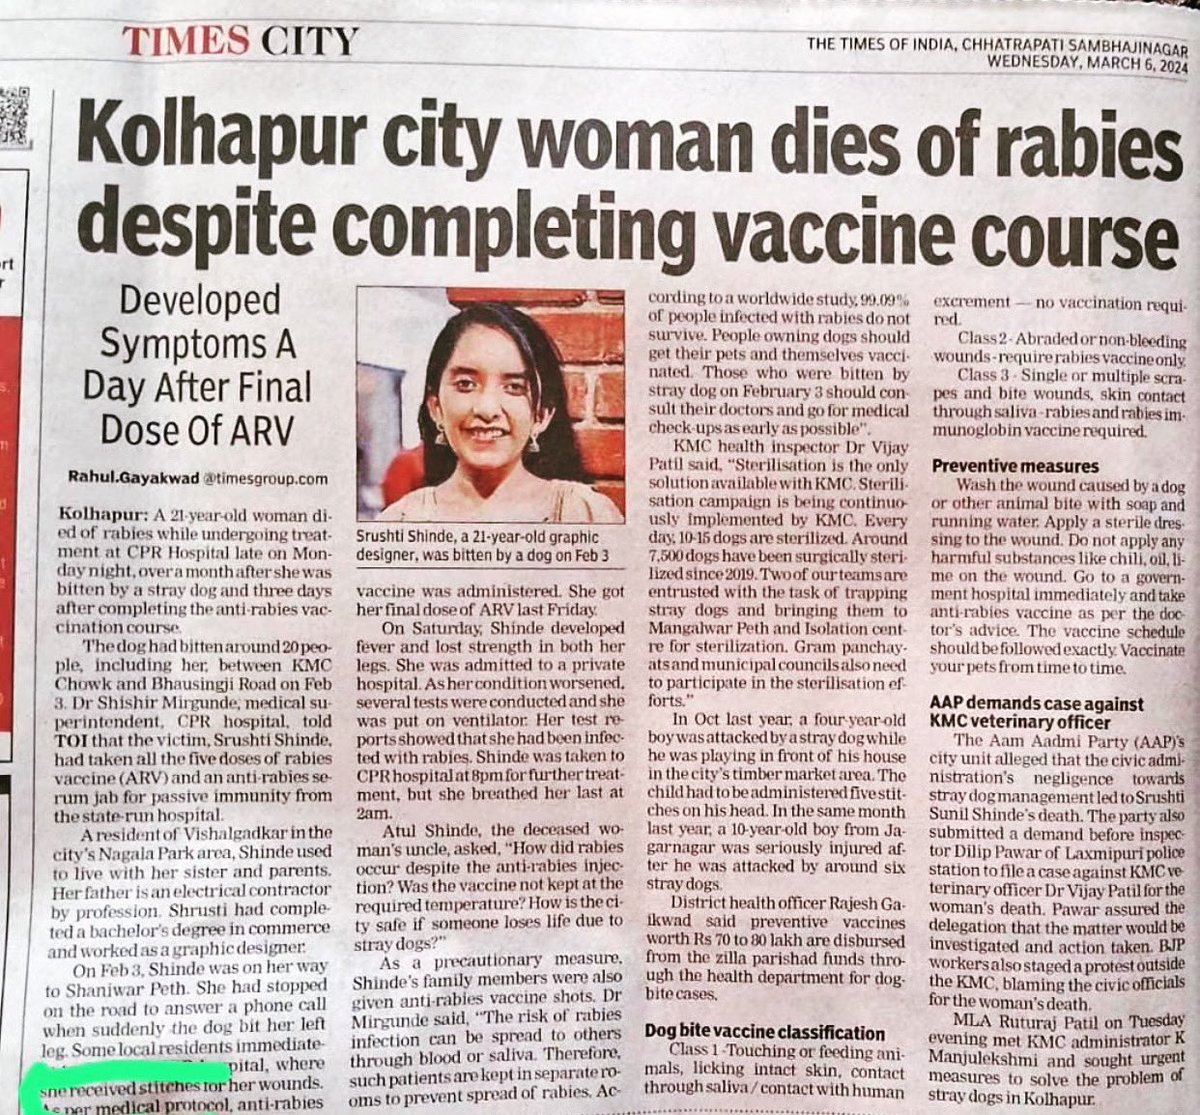 @narendramodi Sir, I hope you can spare some time and attention on eliminating rabies in India,thank you @Brahamvakya